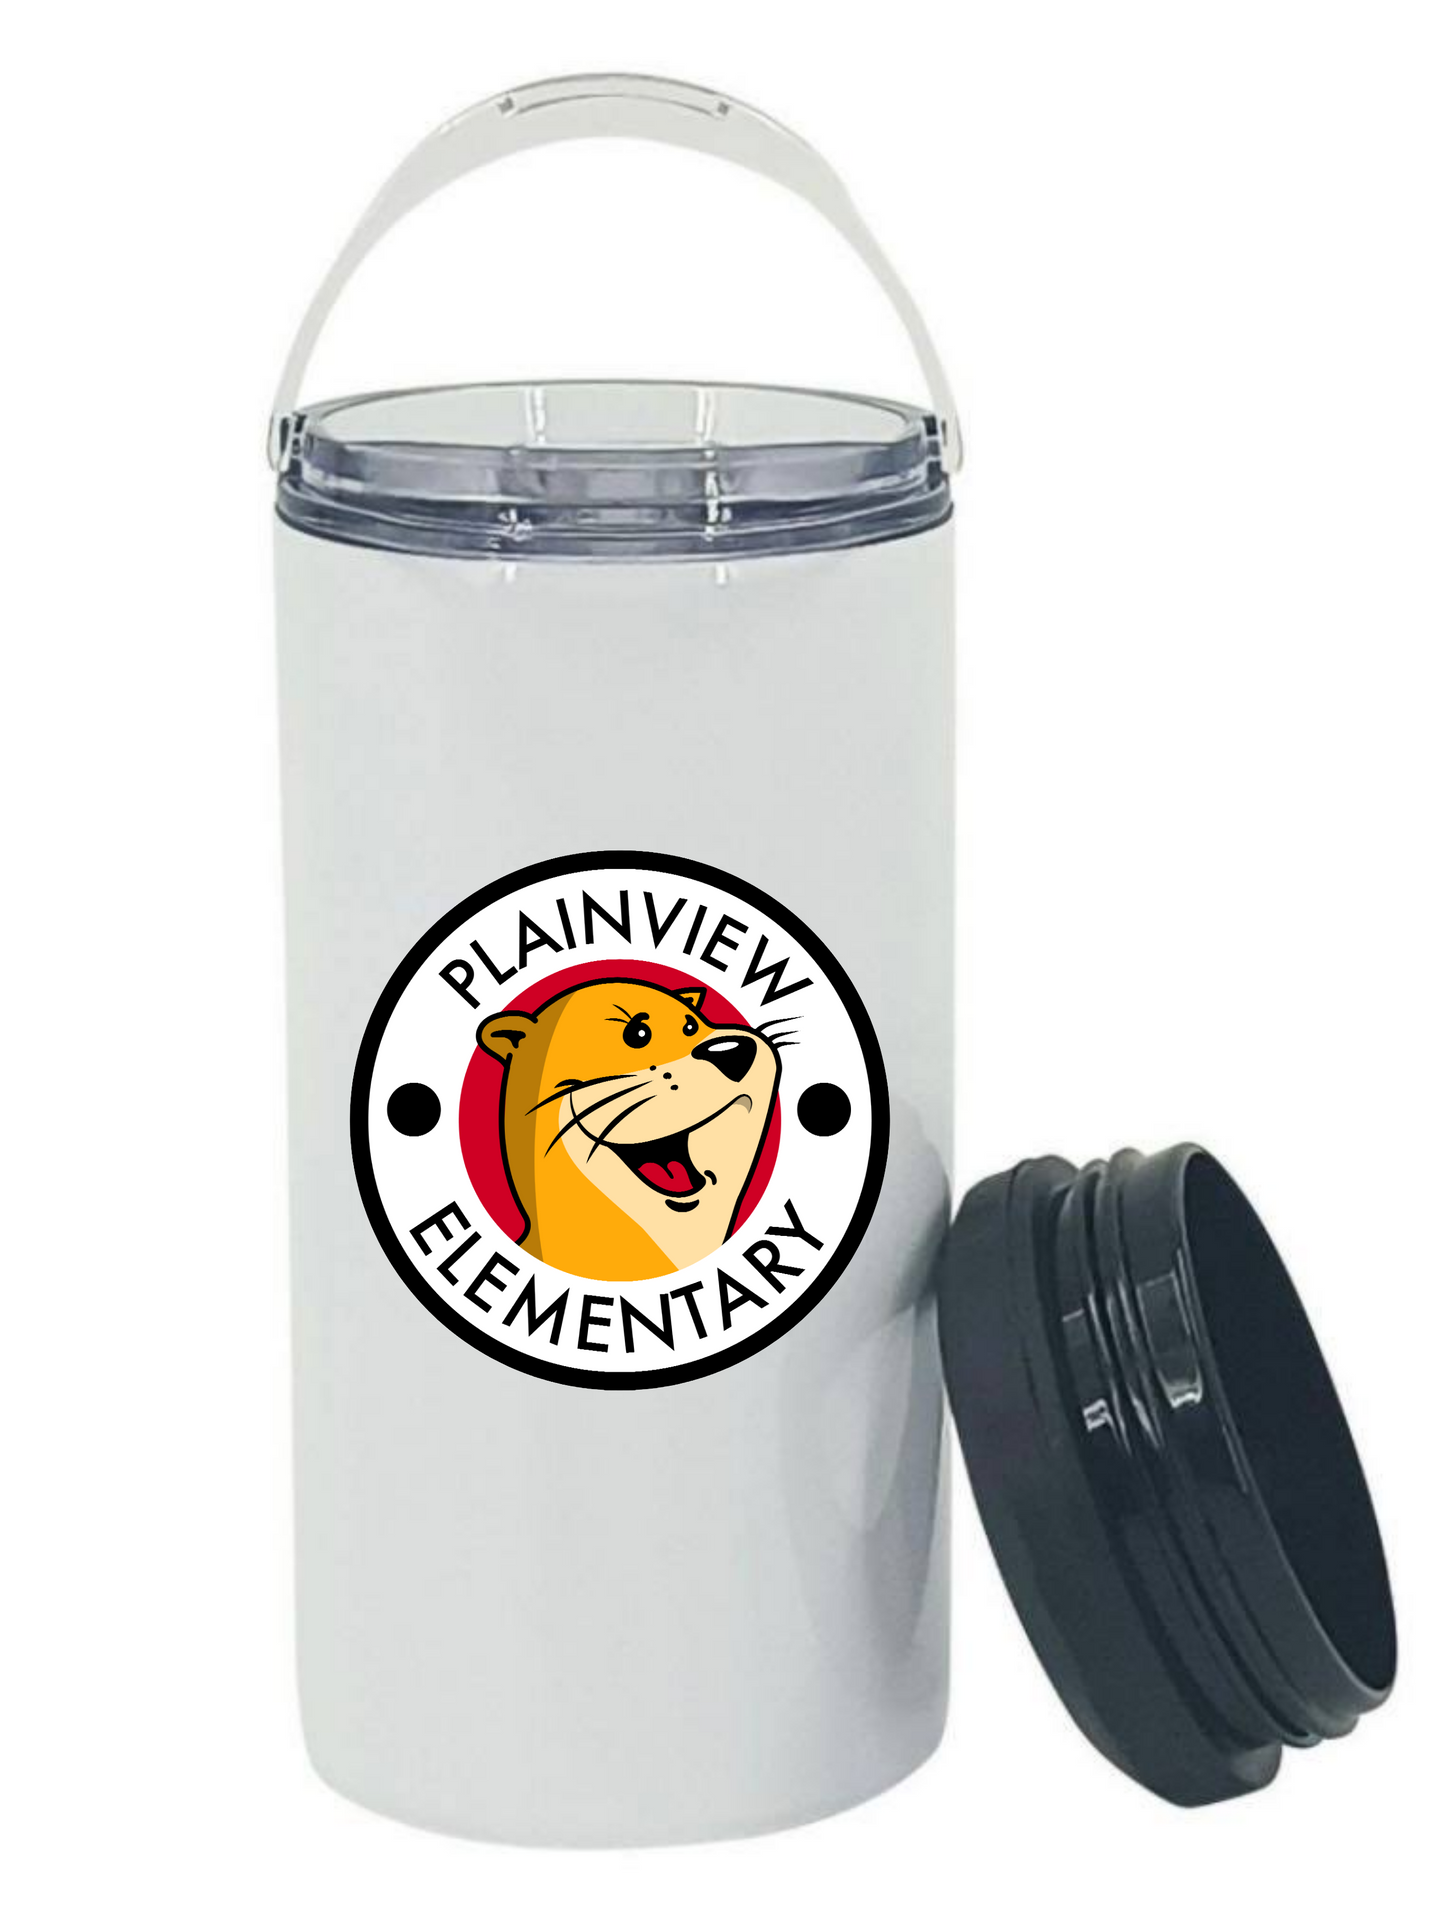 Plainview Elementary 4 in 1 Tumbler/Can Cooler